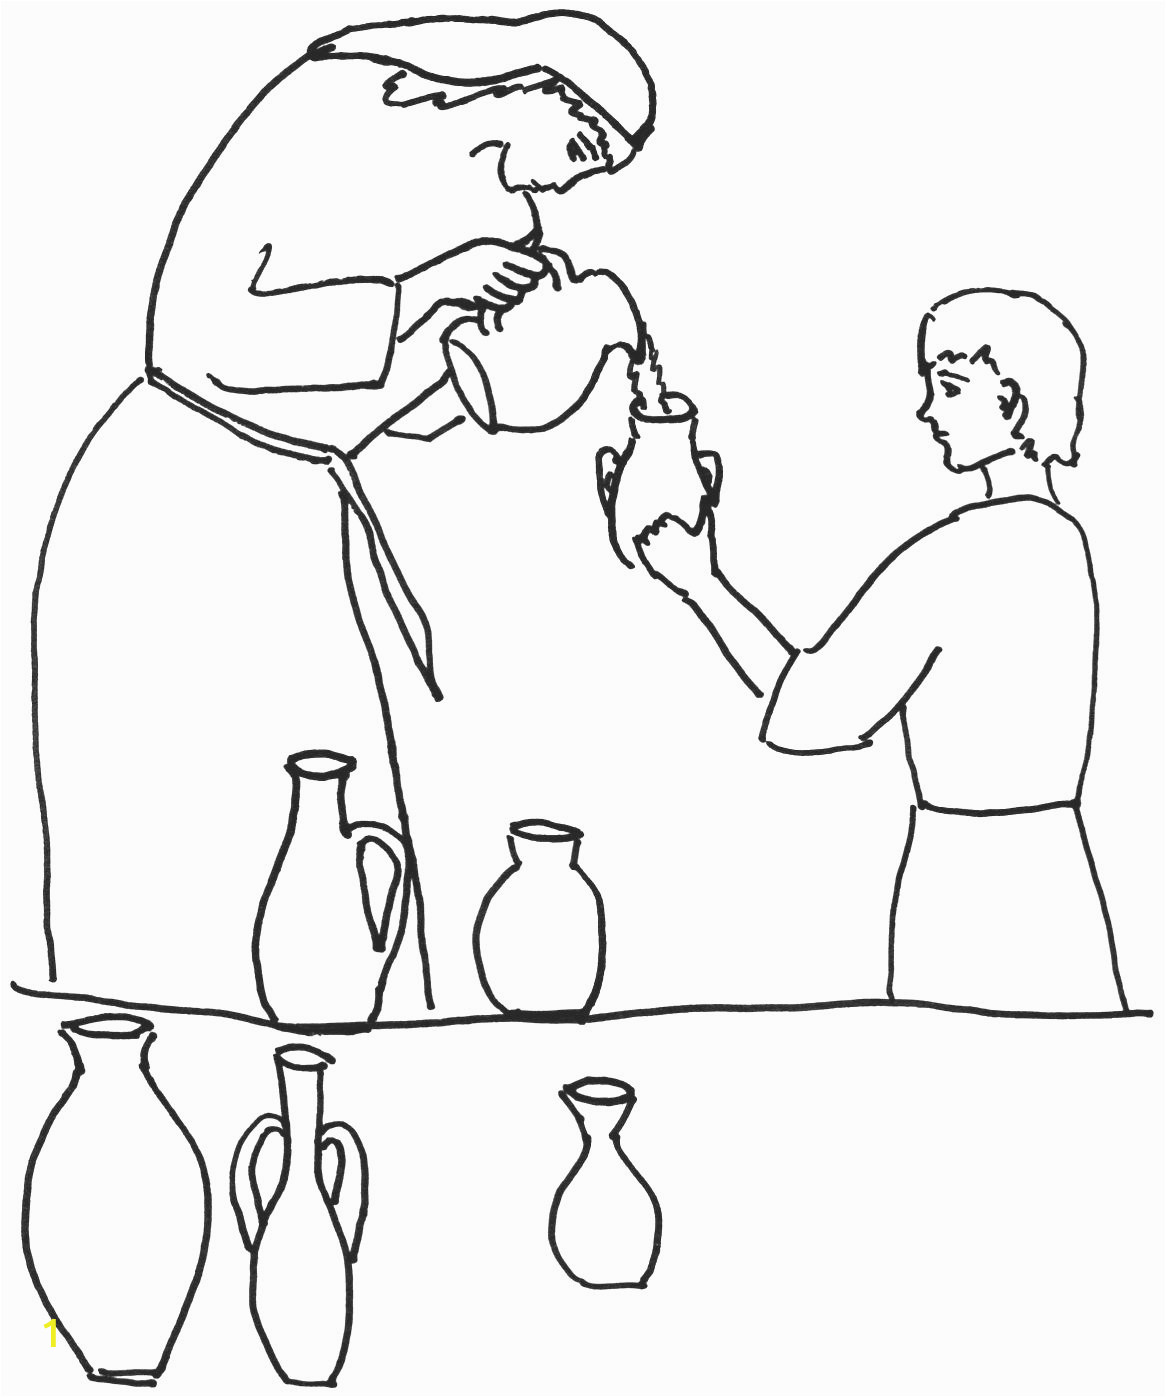 elijah and the widow woman coloring pages